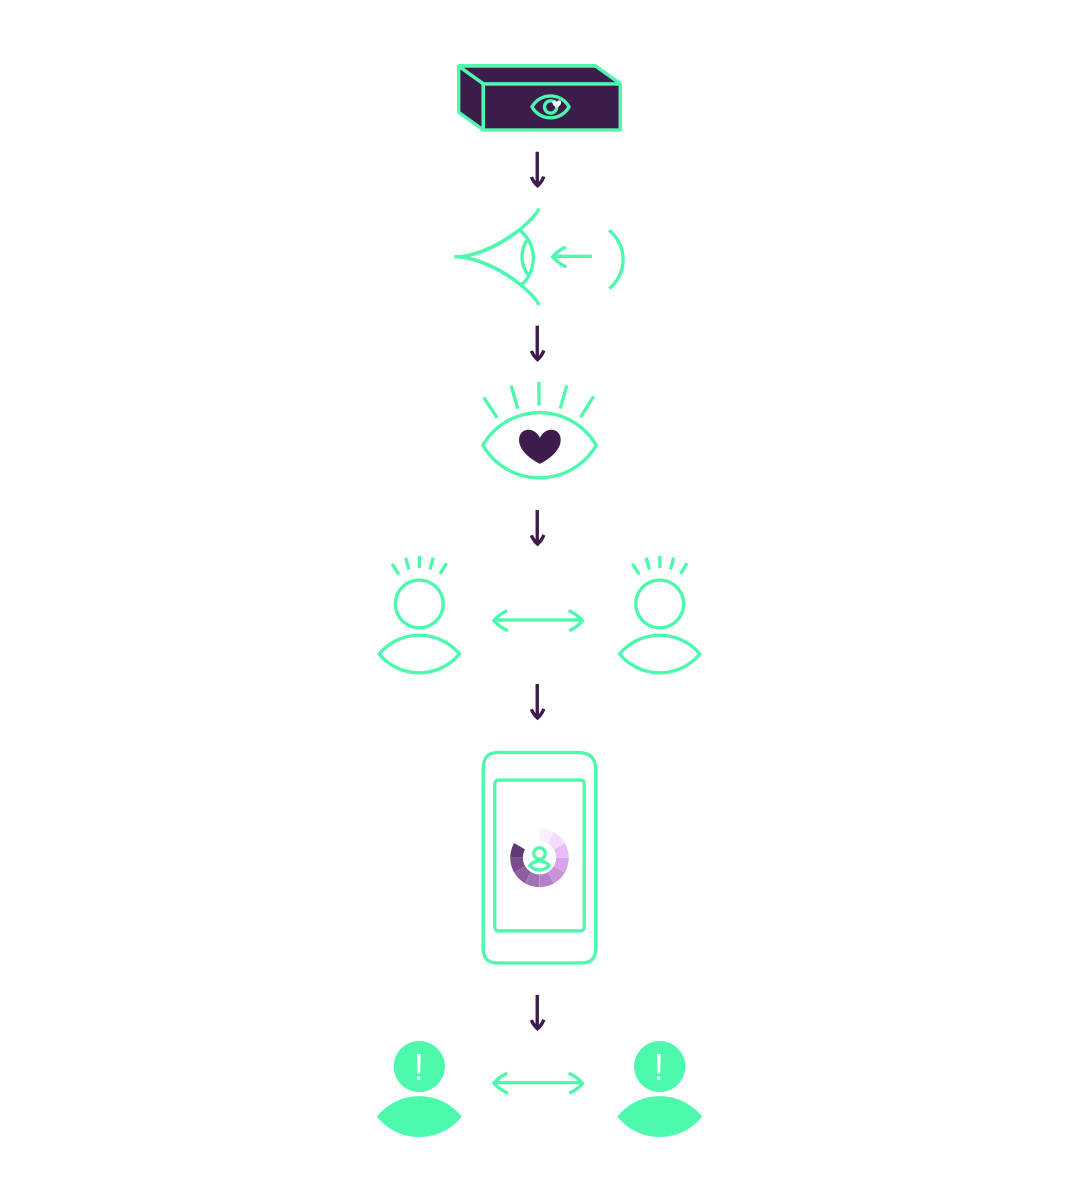 personal project redesign near future wearables dating app